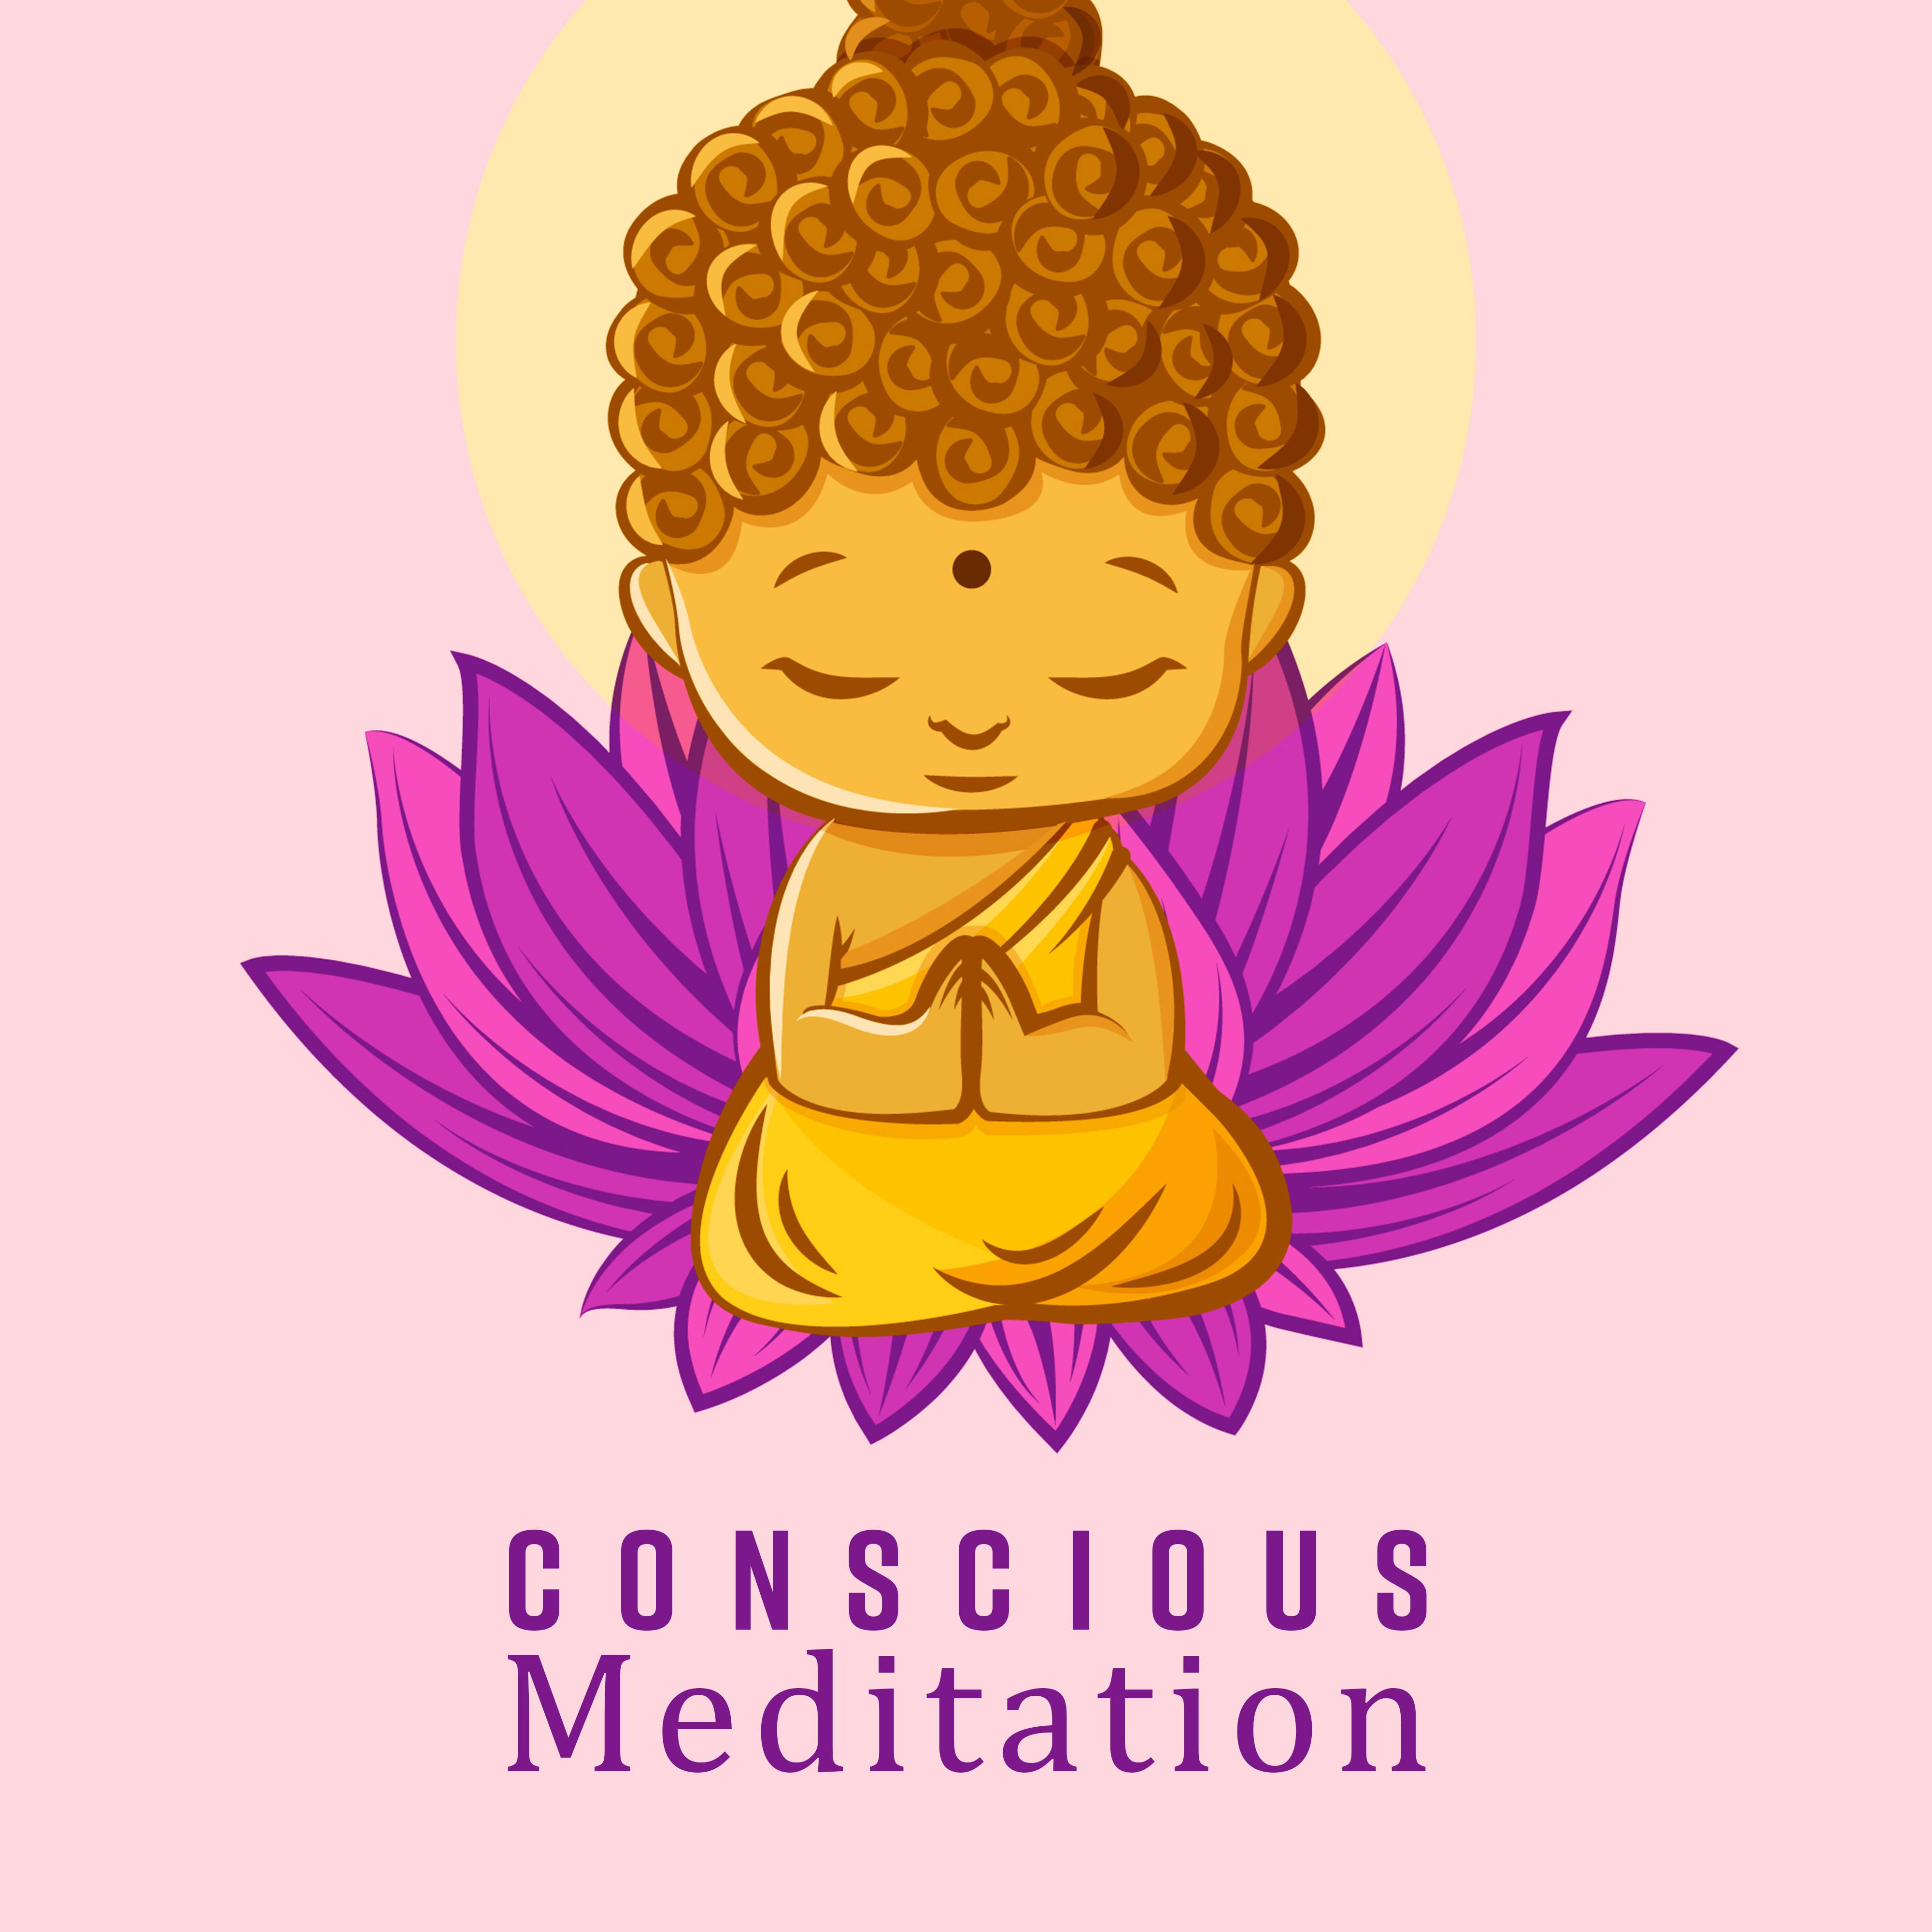 Conscious Meditation: Aware and Open Mind